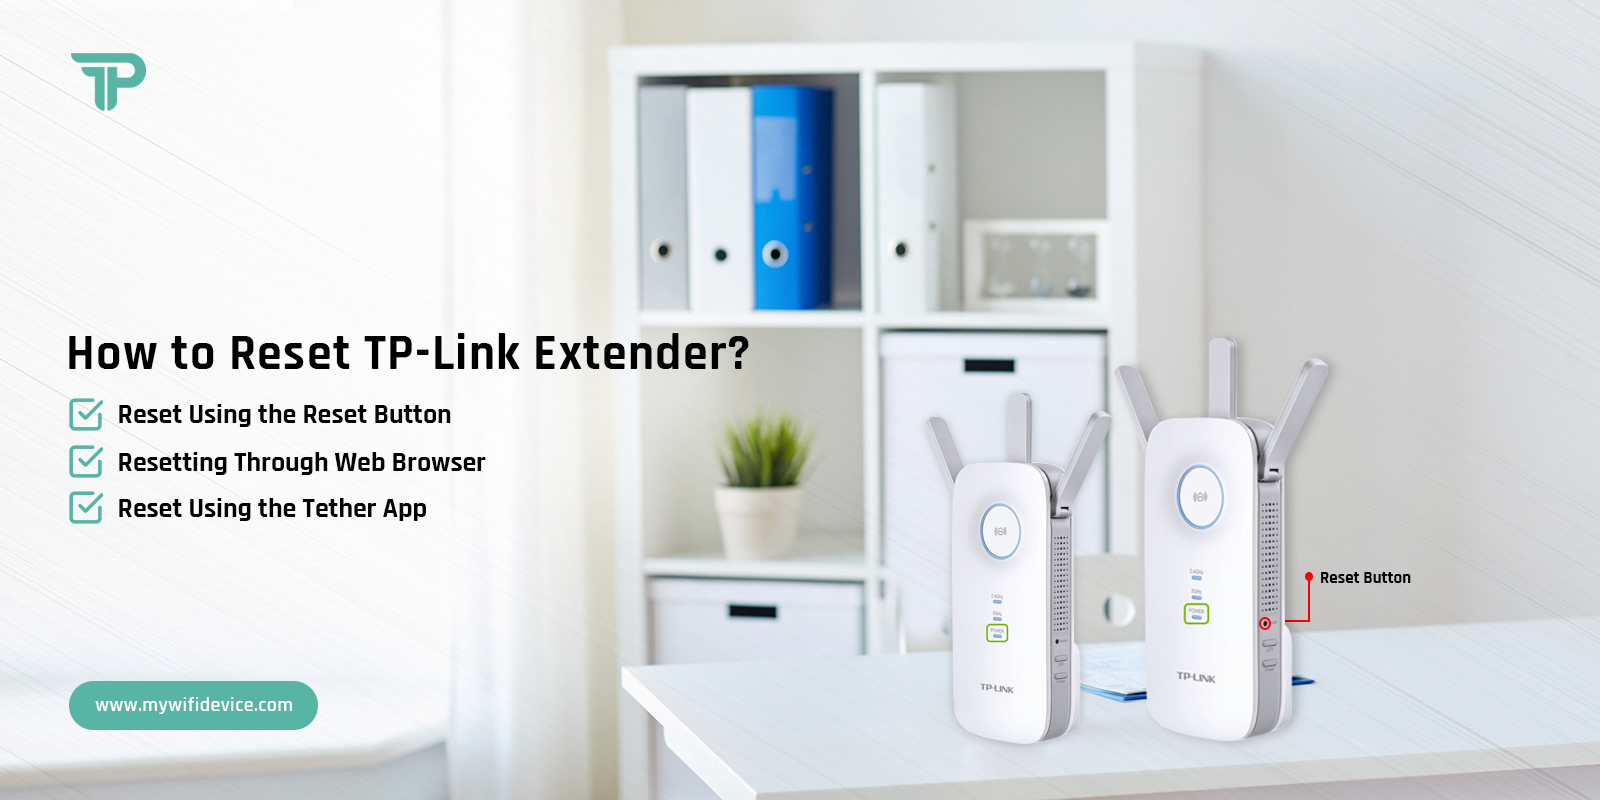 How to Reset TP-Link Extender?